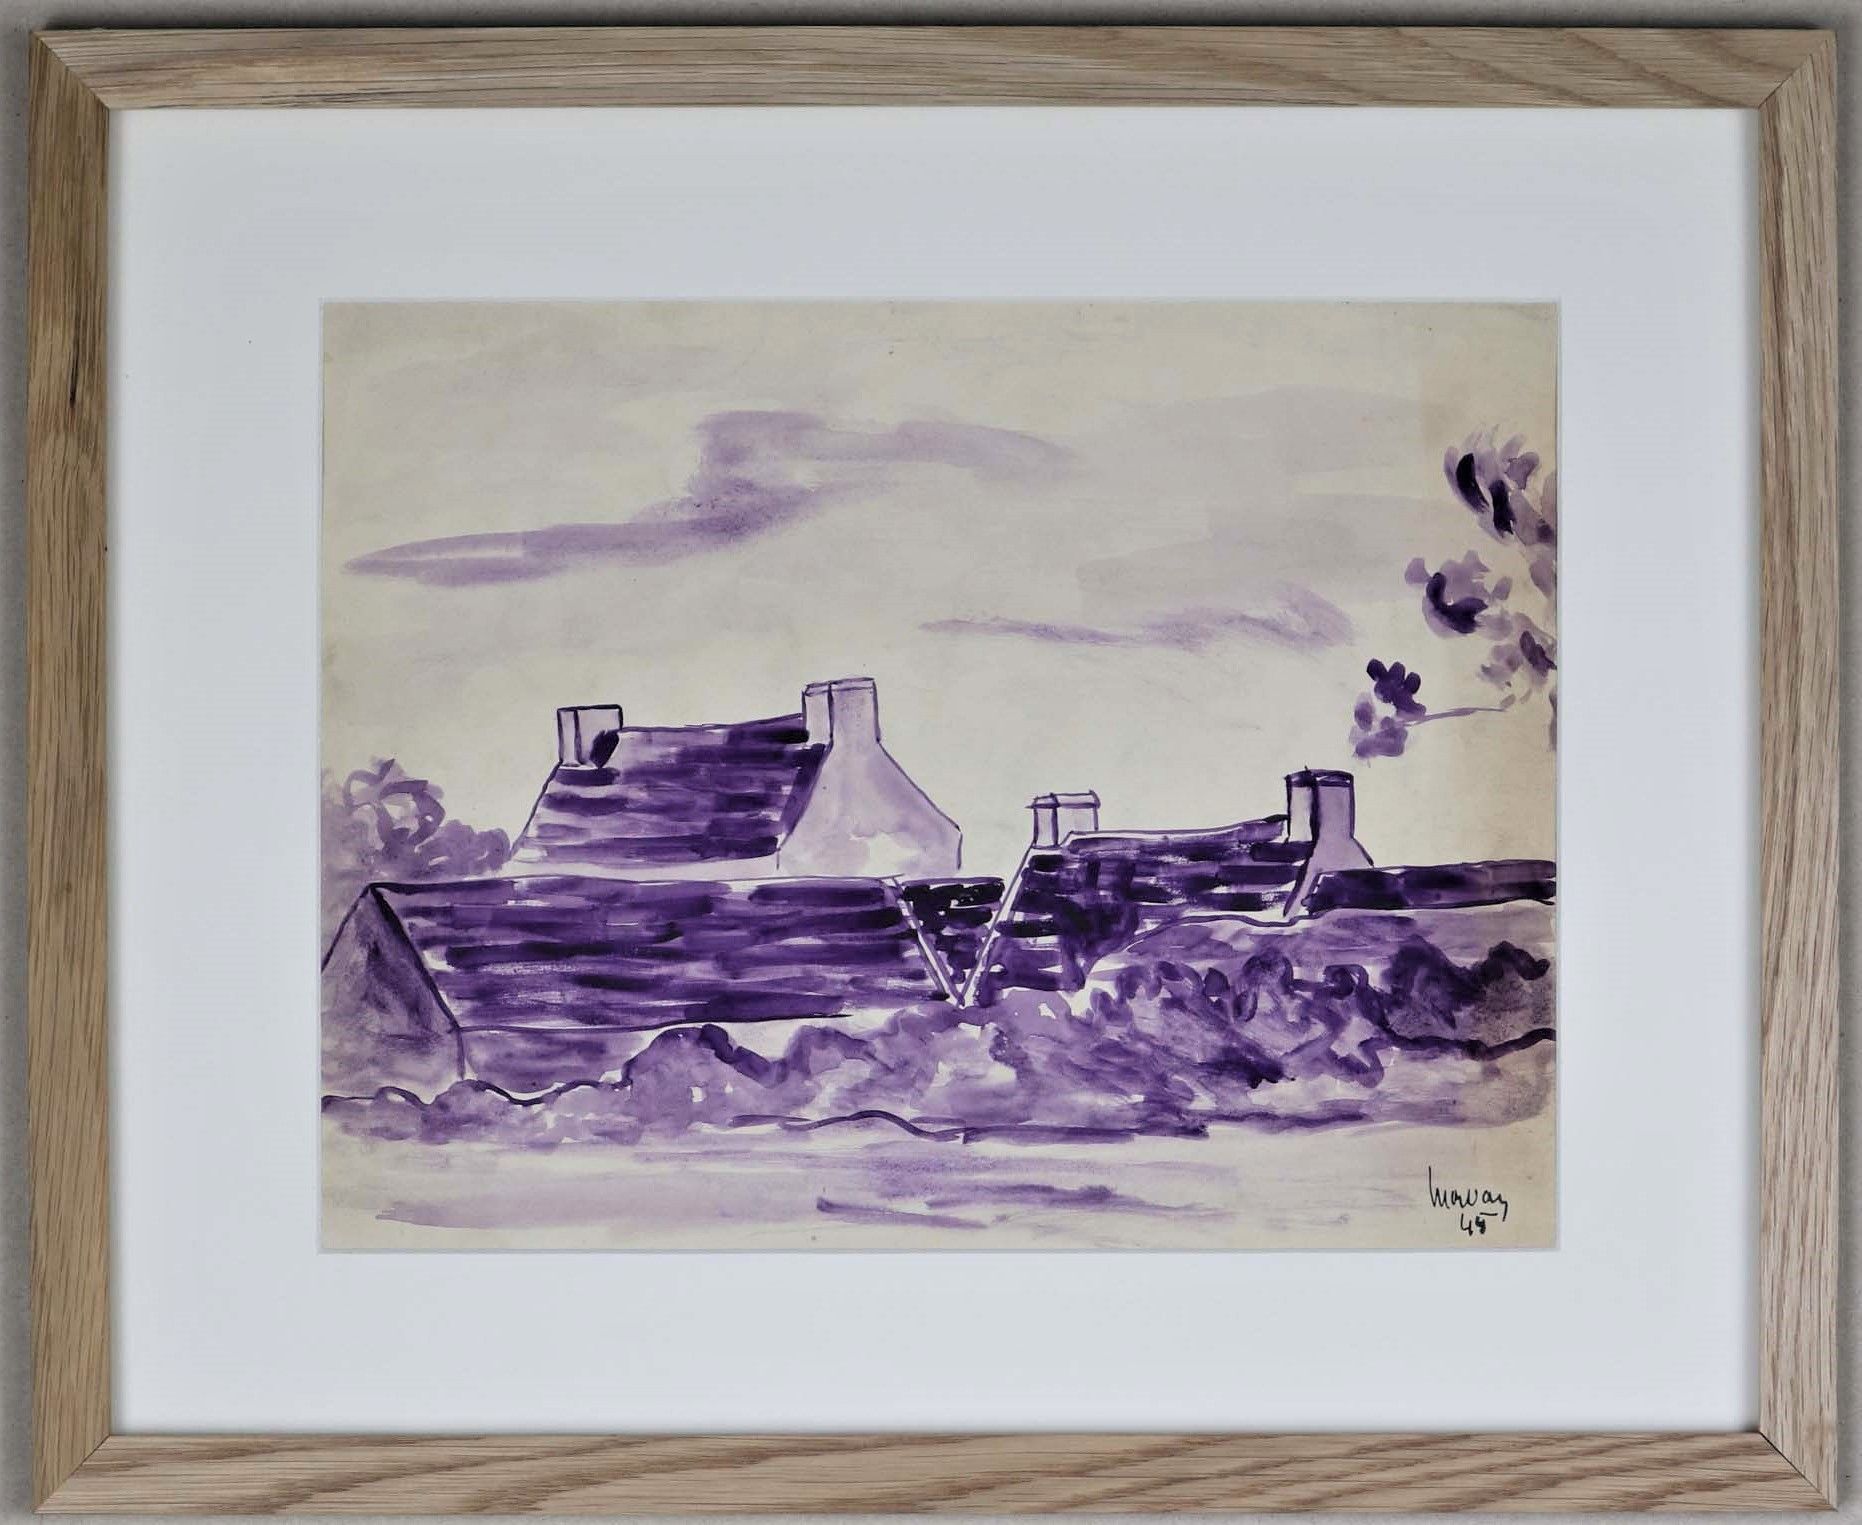 Null Jean-Jacques MORVAN (1928-2005): "Farm in Brittany 45", watercolour on pape&hellip;